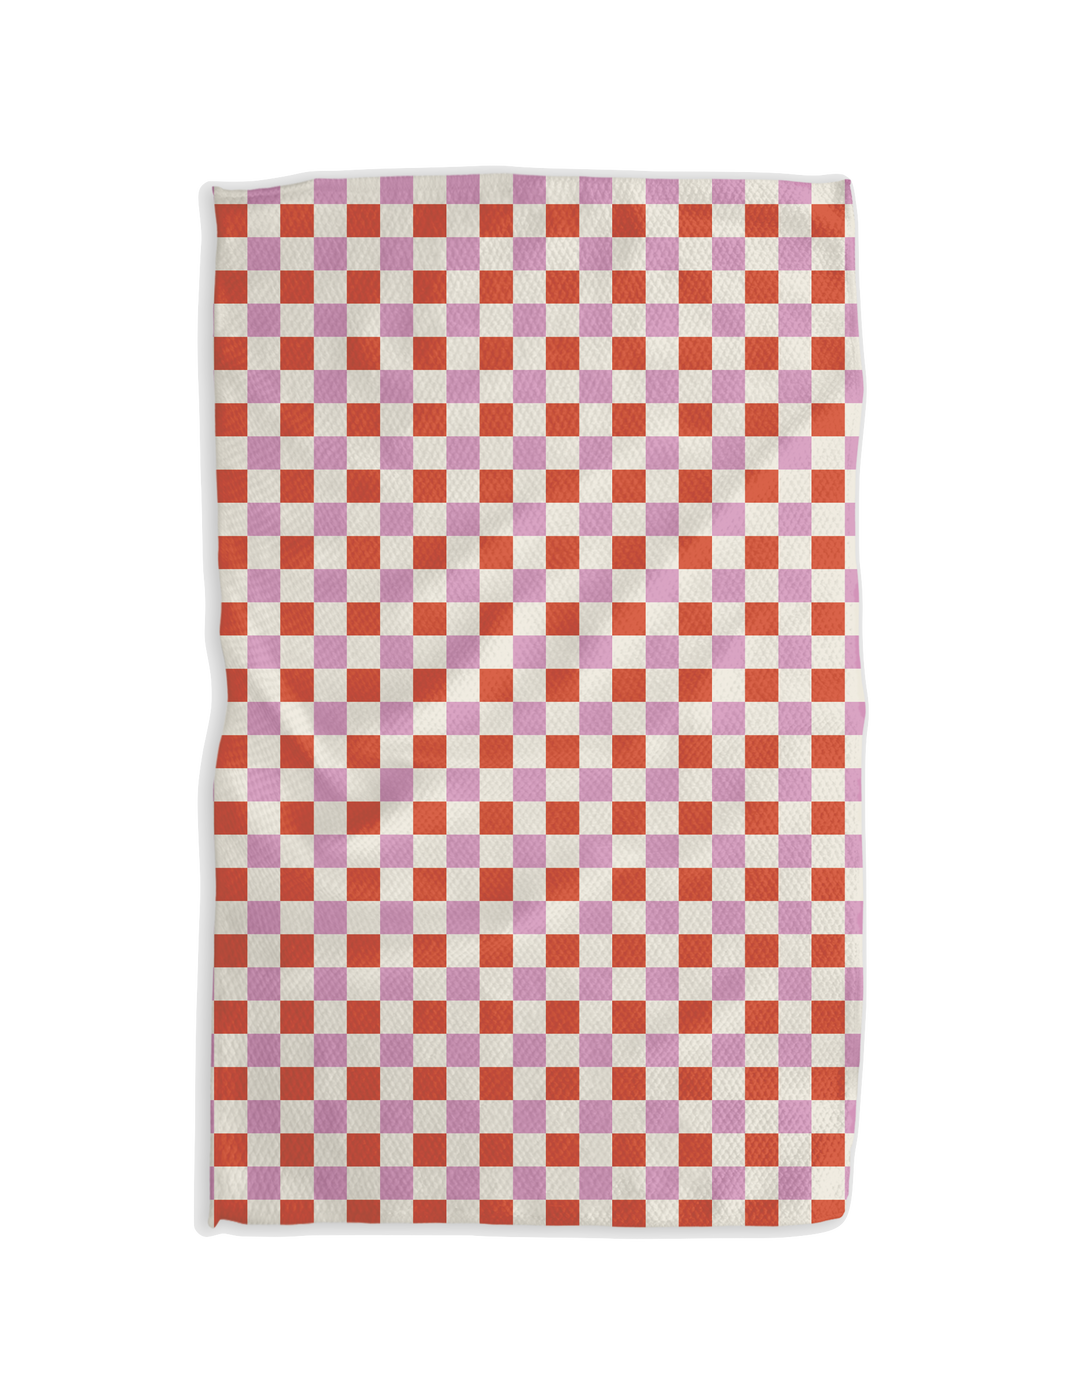 DANSE AMOUR RED CHECKERED TEA TOWEL Geometry Kitchenware Bonjour Fete - Party Supplies